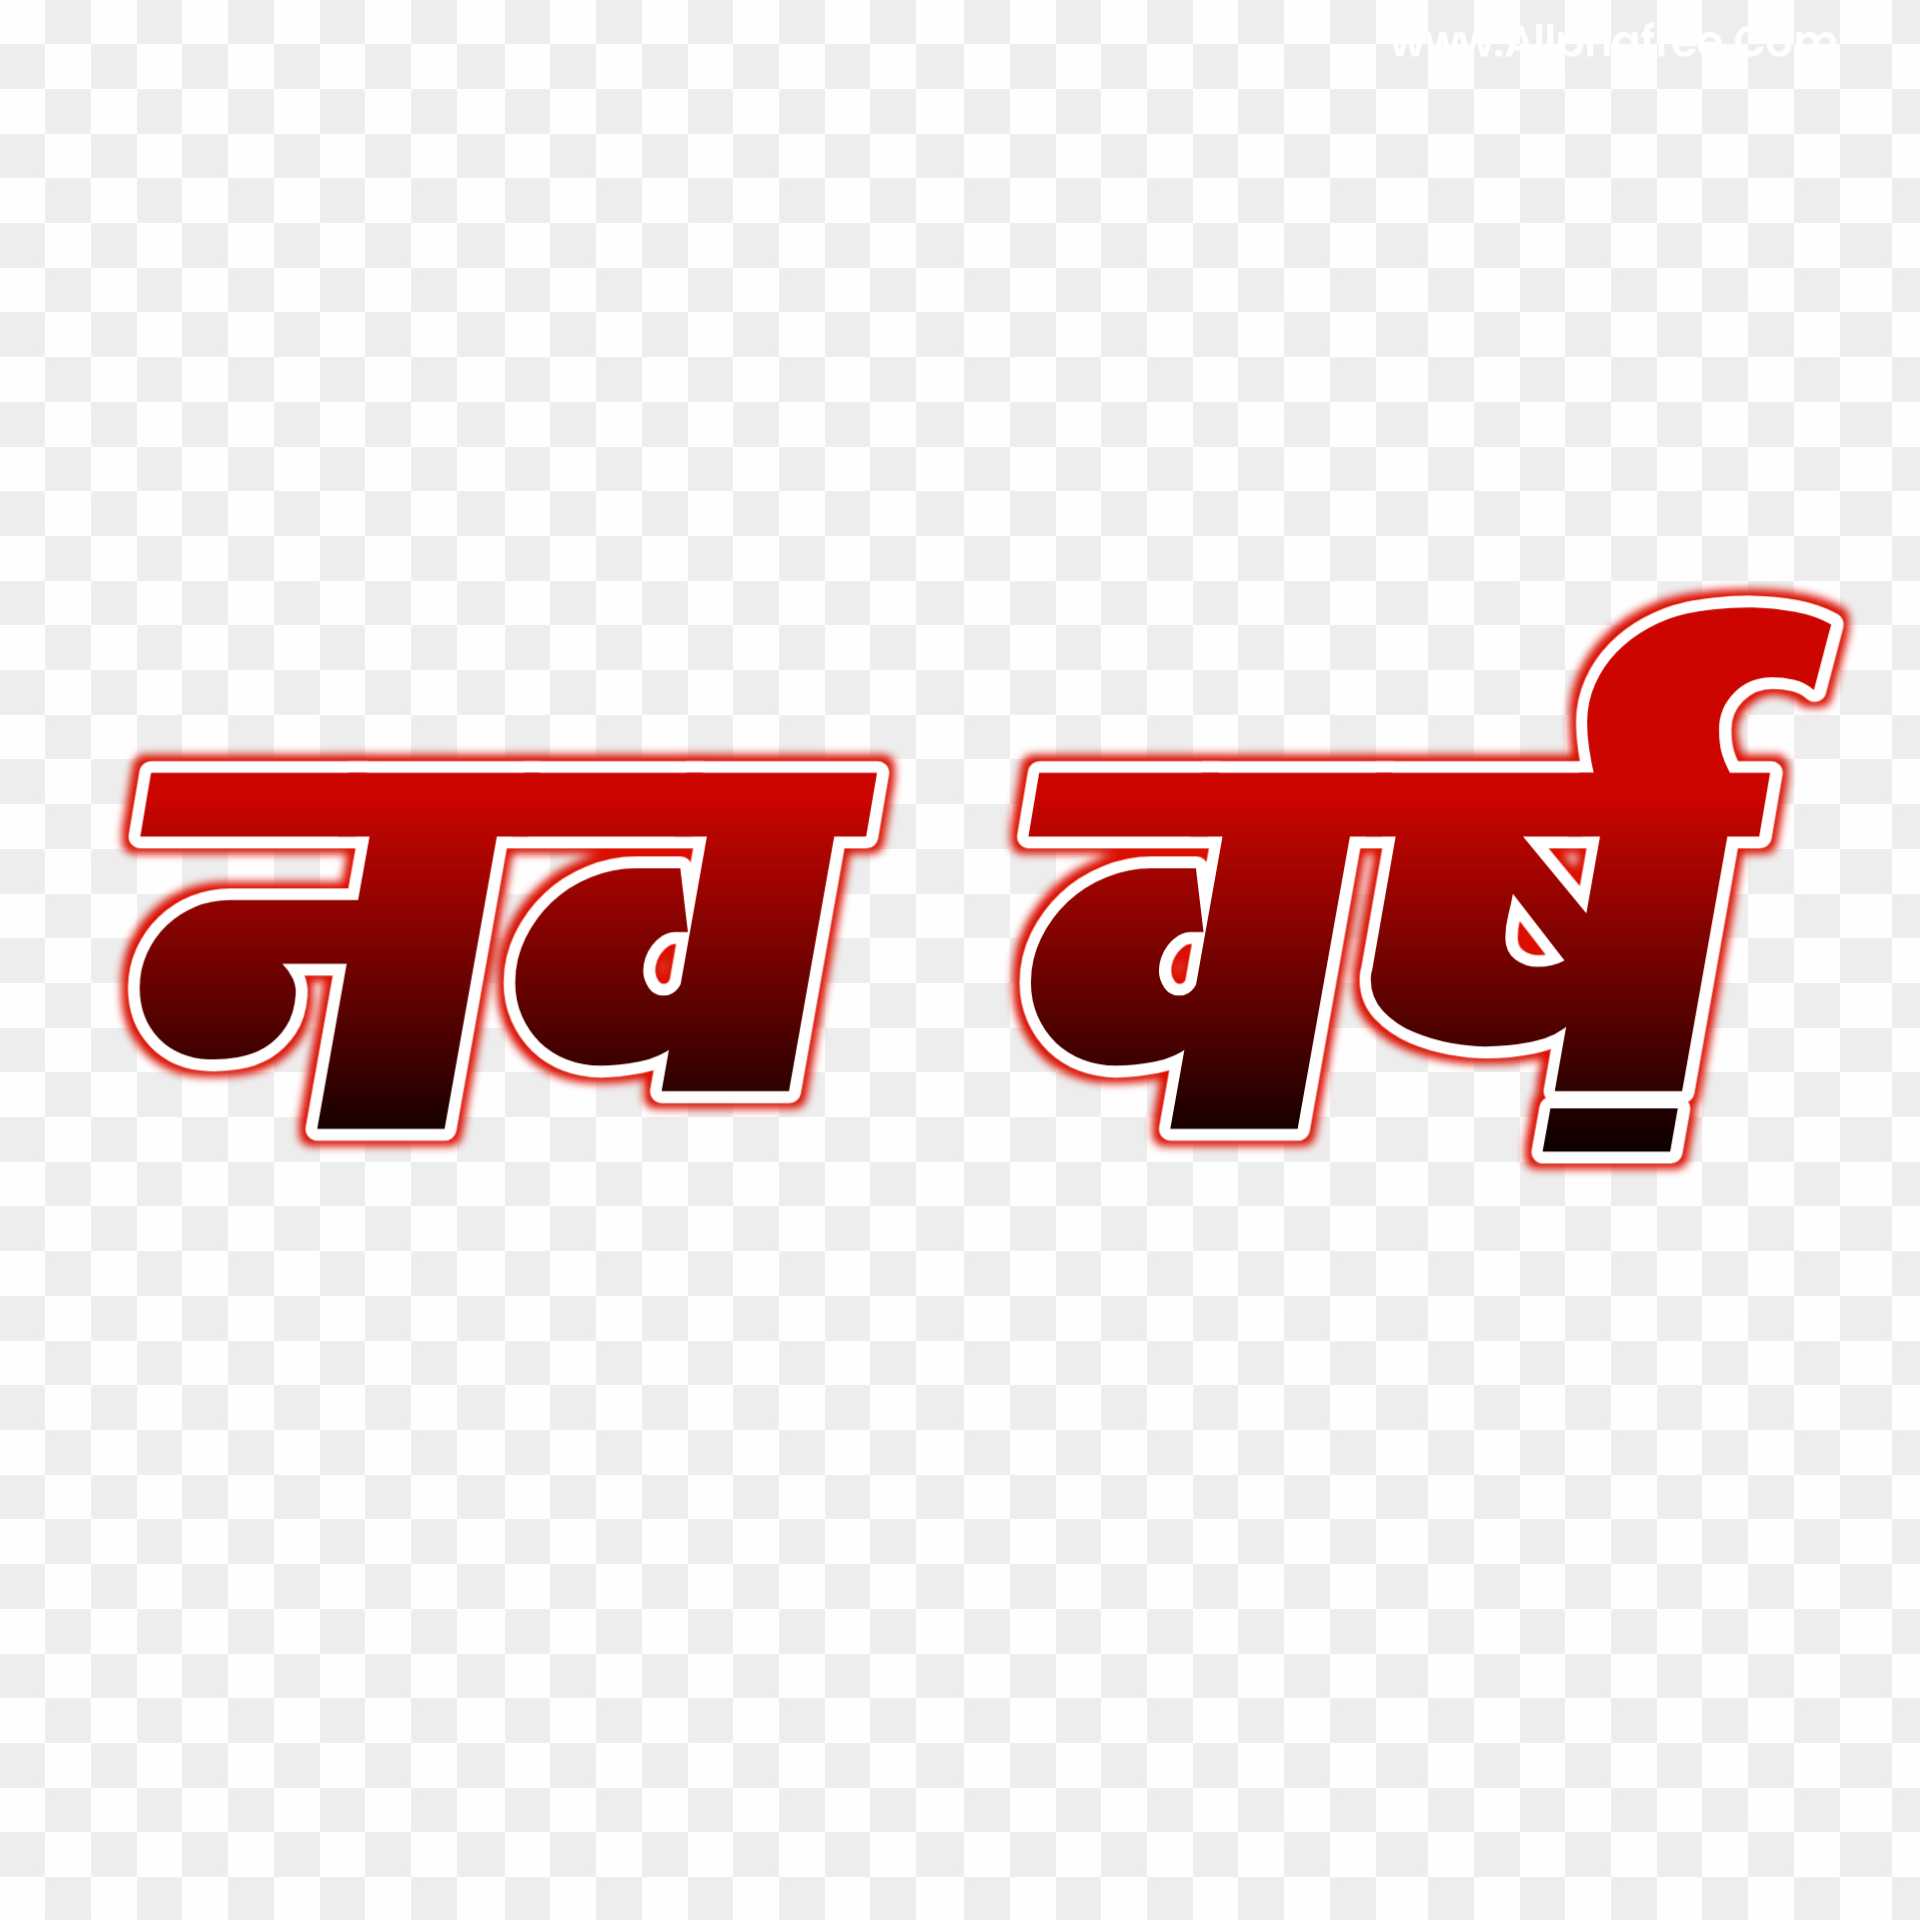 Happy new year in Hindi text PNG images download